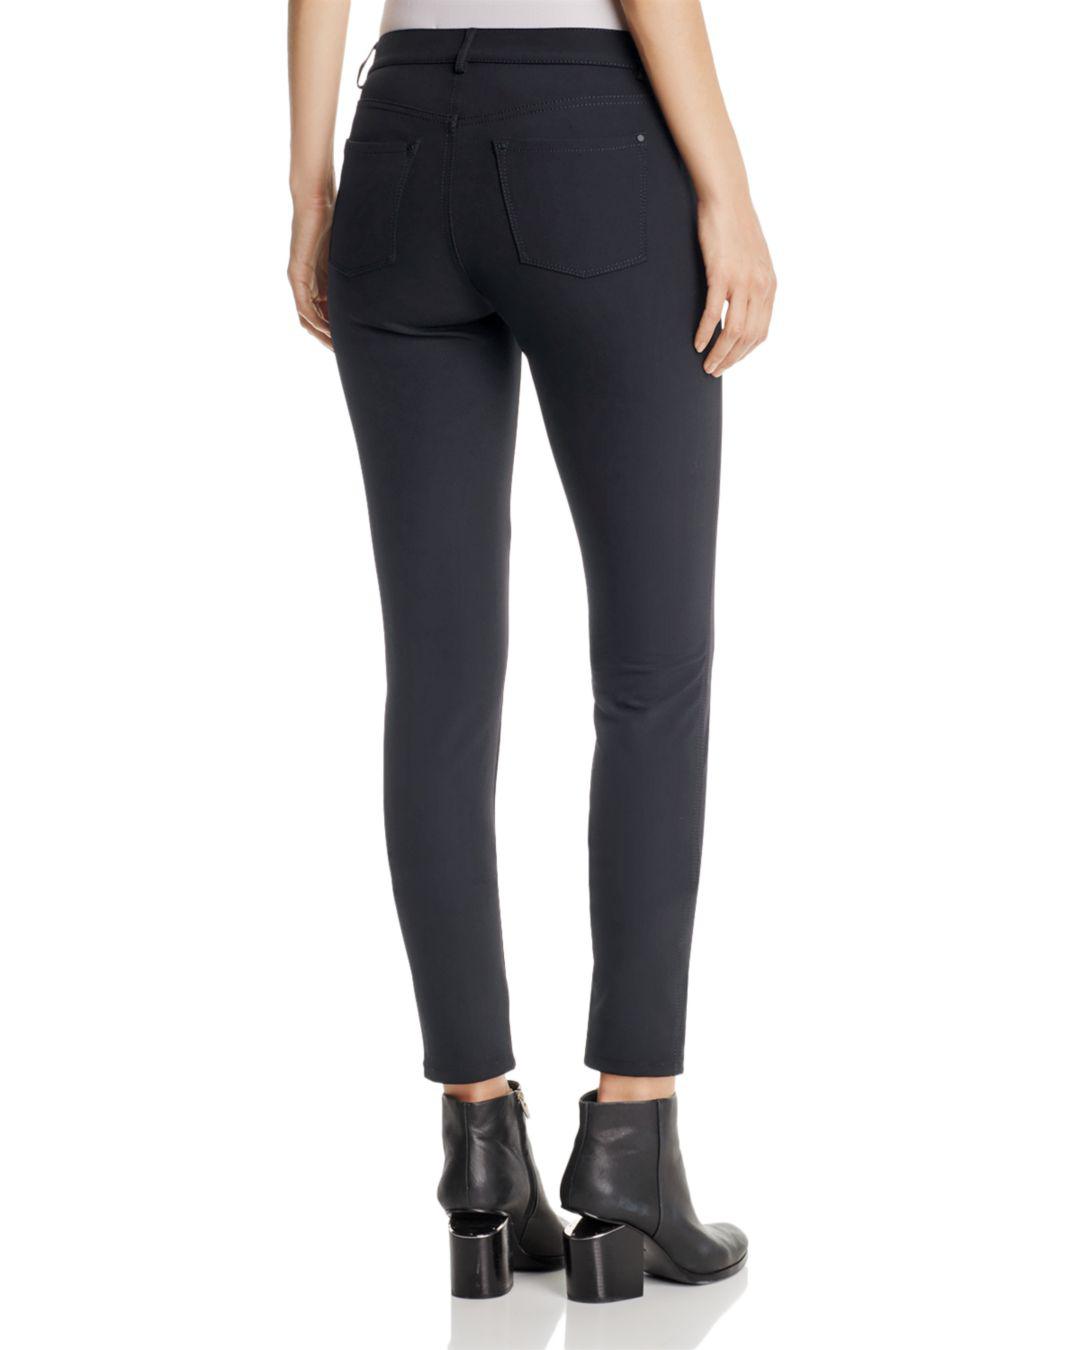 Lafayette 148 New York Acclaimed Stretch Mercer Pants in Blue - Lyst